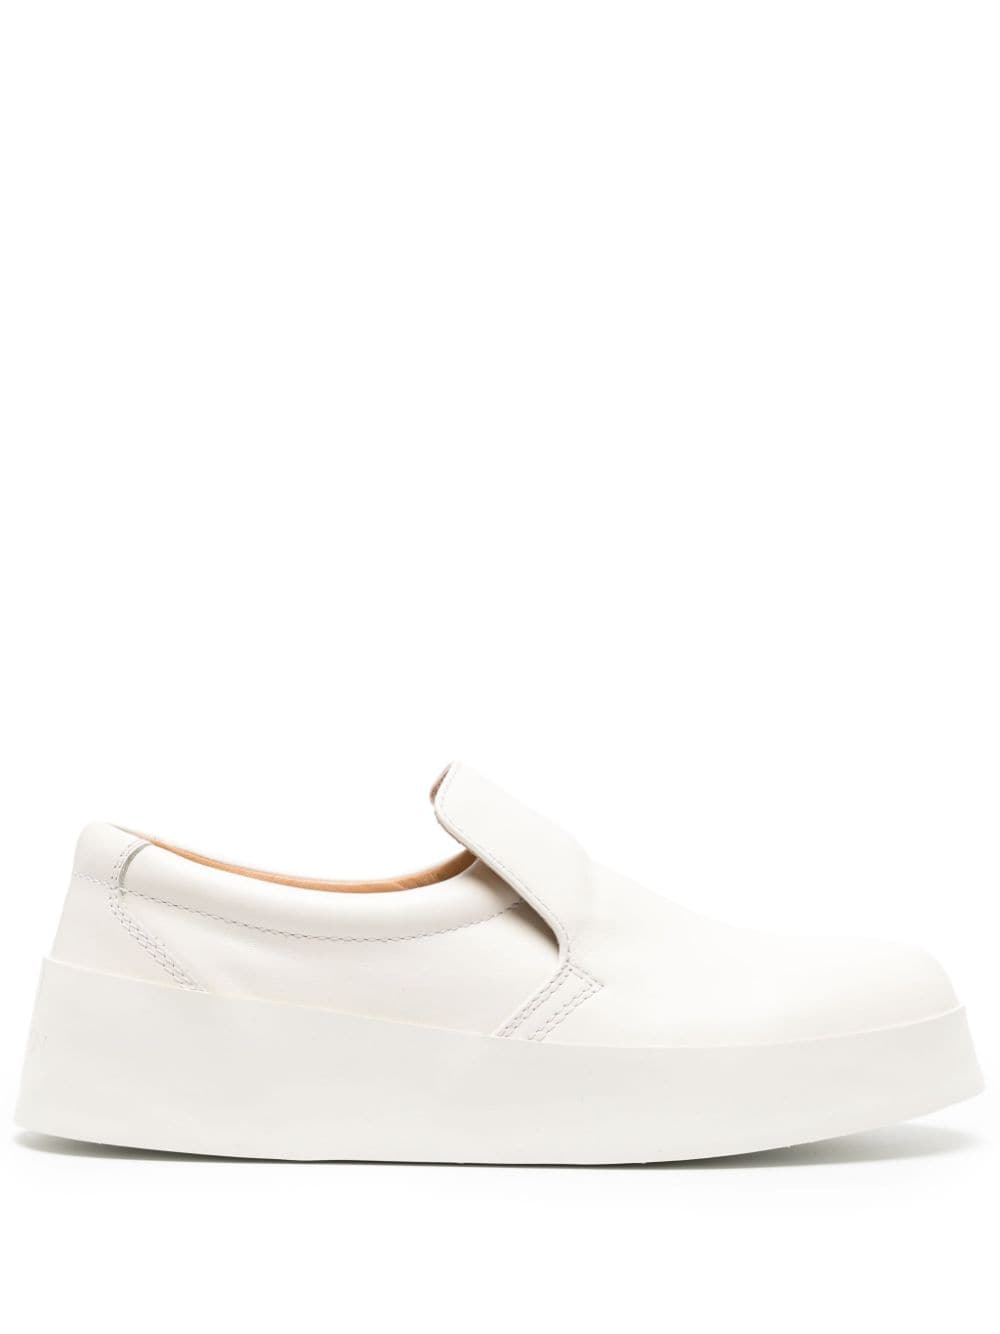 JW Anderson slip-on leather sneakers - White